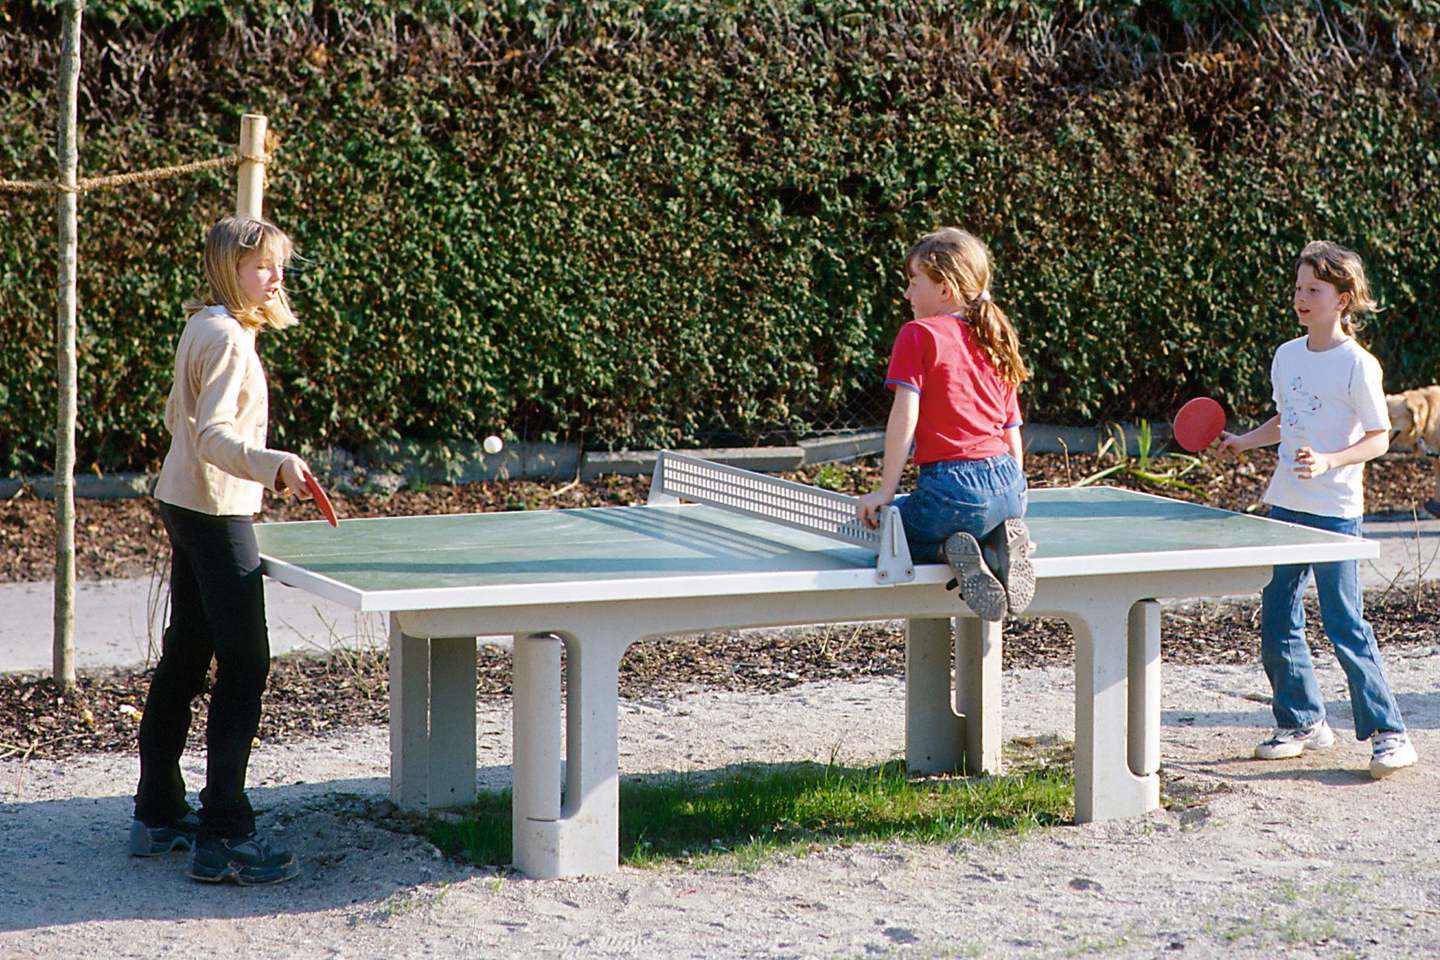 Table Tennis Table with net Order No